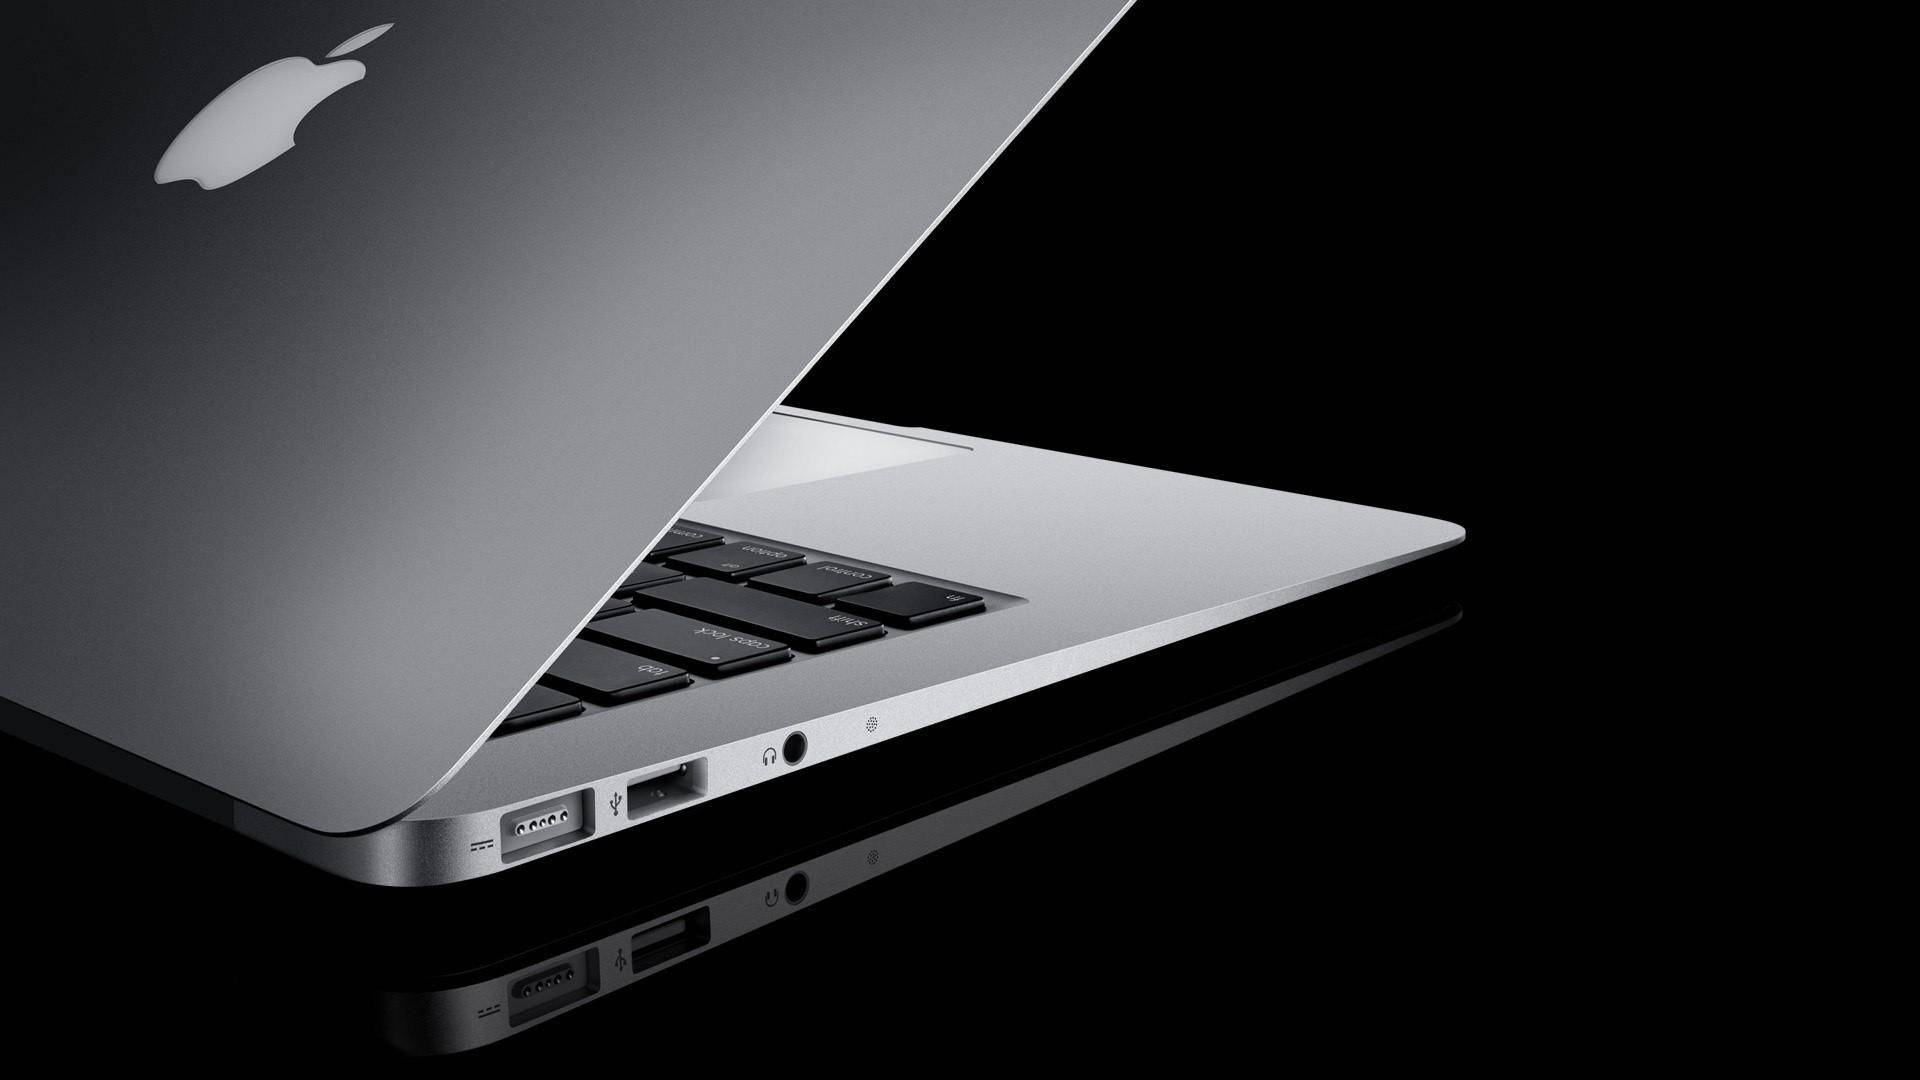 Walmart and Apple Collaborate to Offer Special Deal on M1 MacBook Air